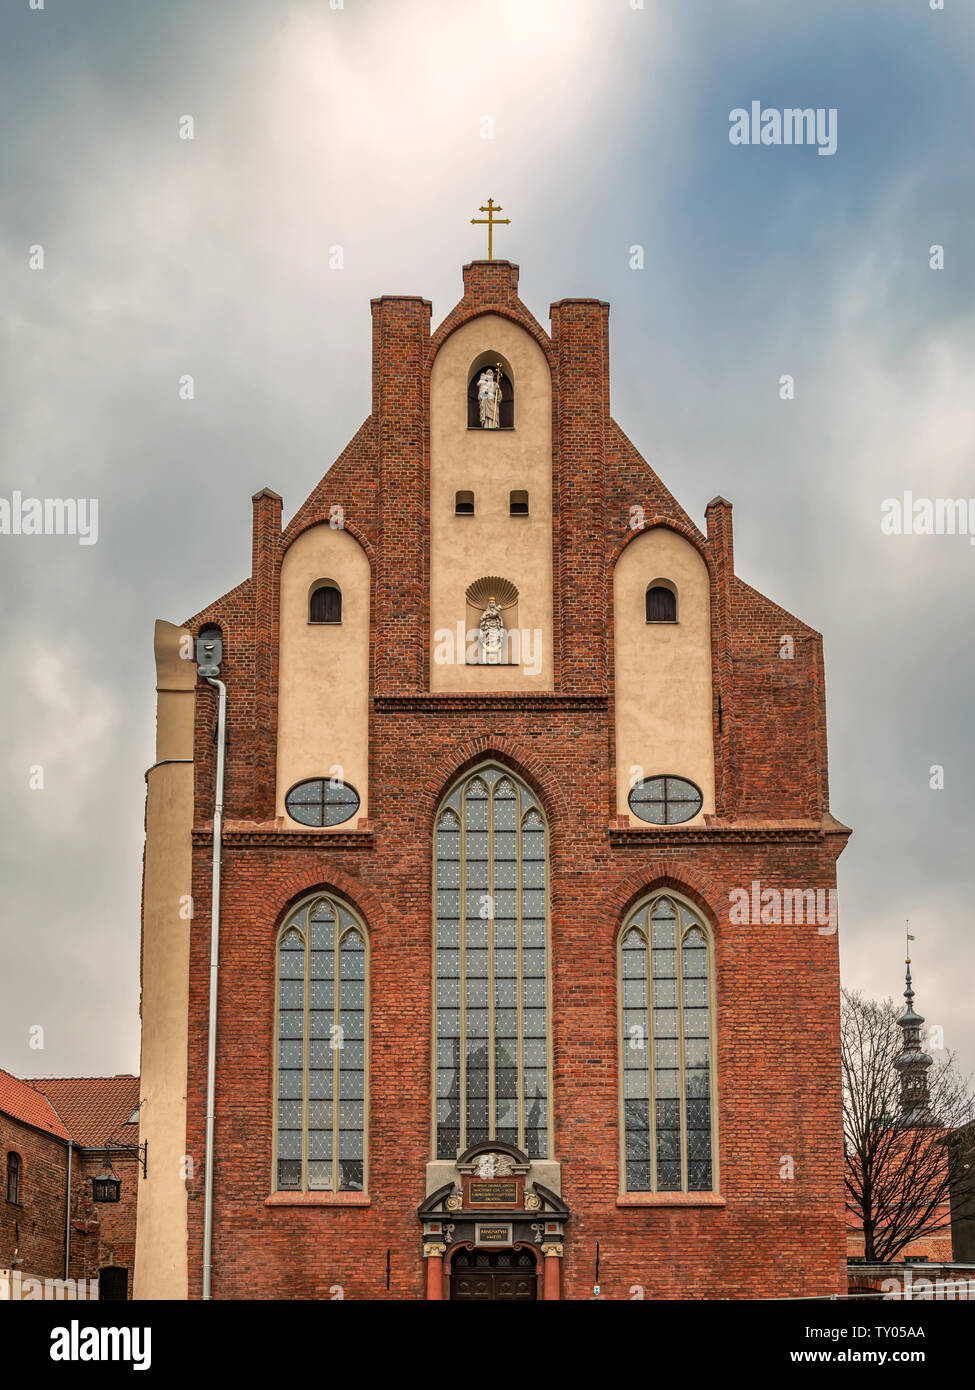 Gdansk, Poland - Feb 14, 2019: View at the facade of St Joseph Church in Gdansk, Poland Stock Photo